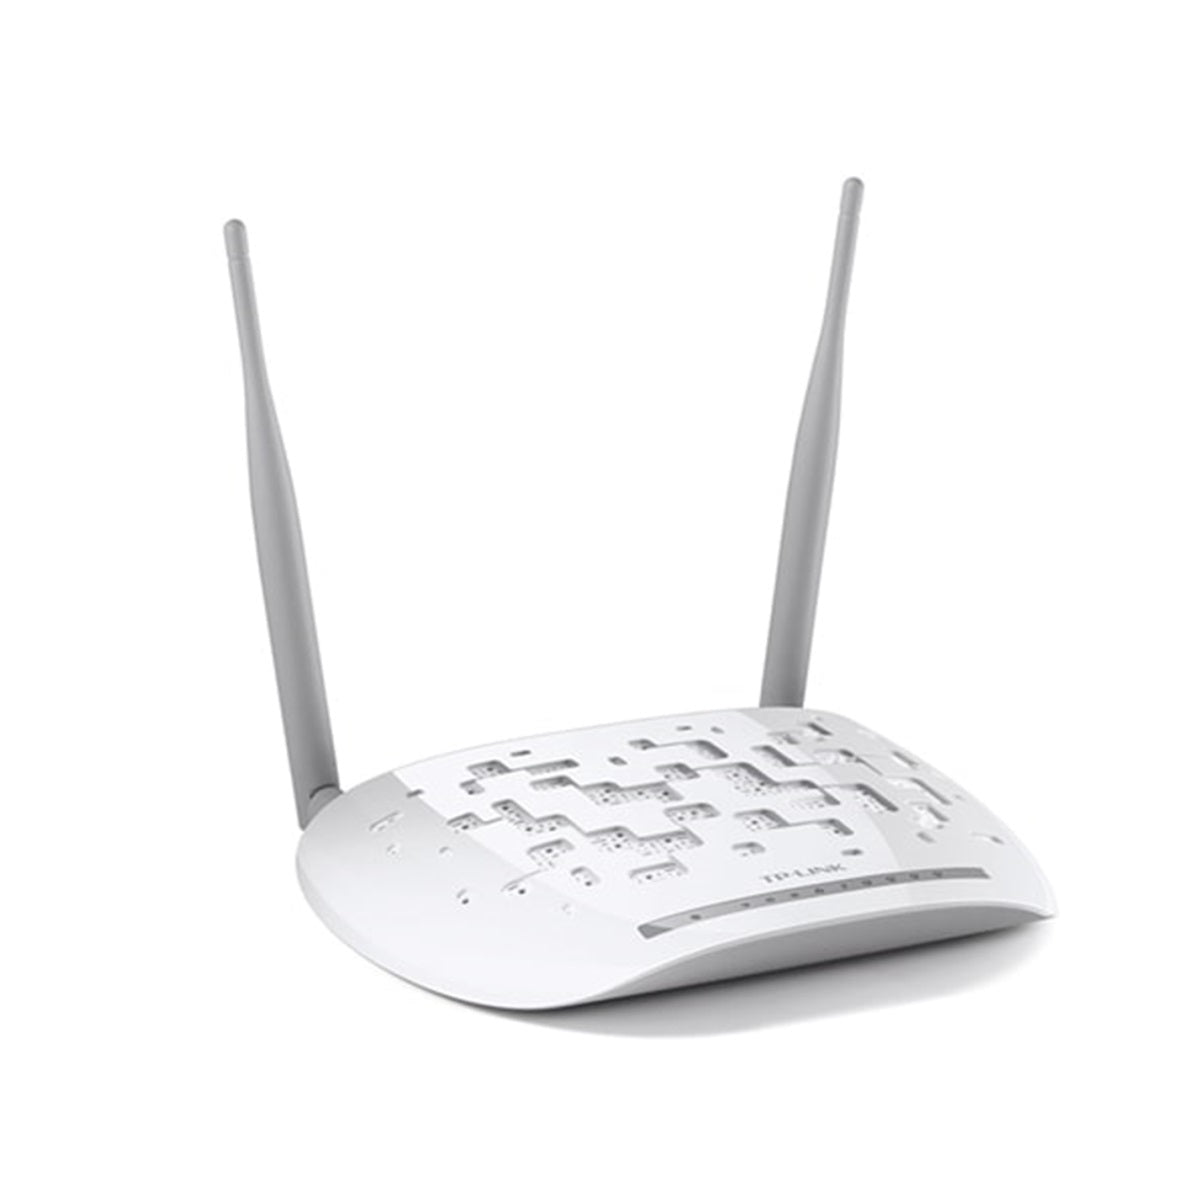 TP-LINK TD-W9970 WiFi Routers (N)